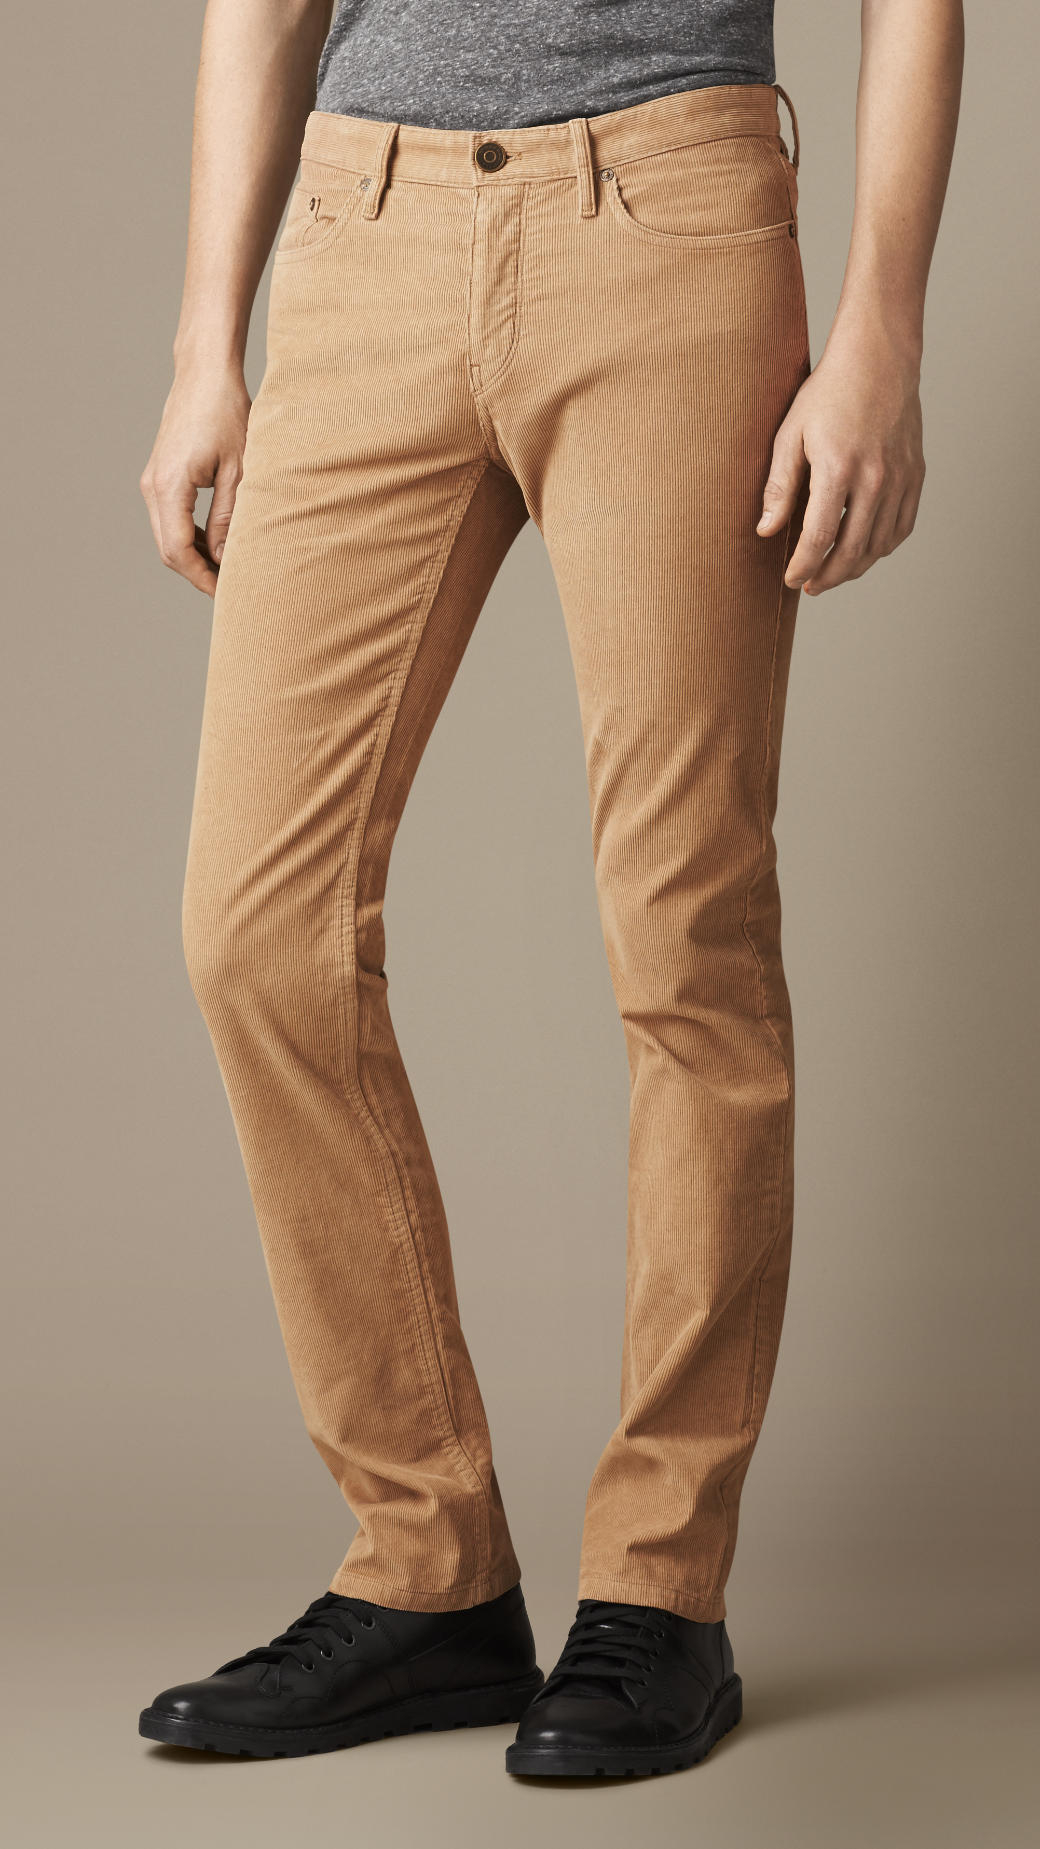 Burberry Slim Fit Corduroy Trousers in Honey (Brown) for Men - Lyst